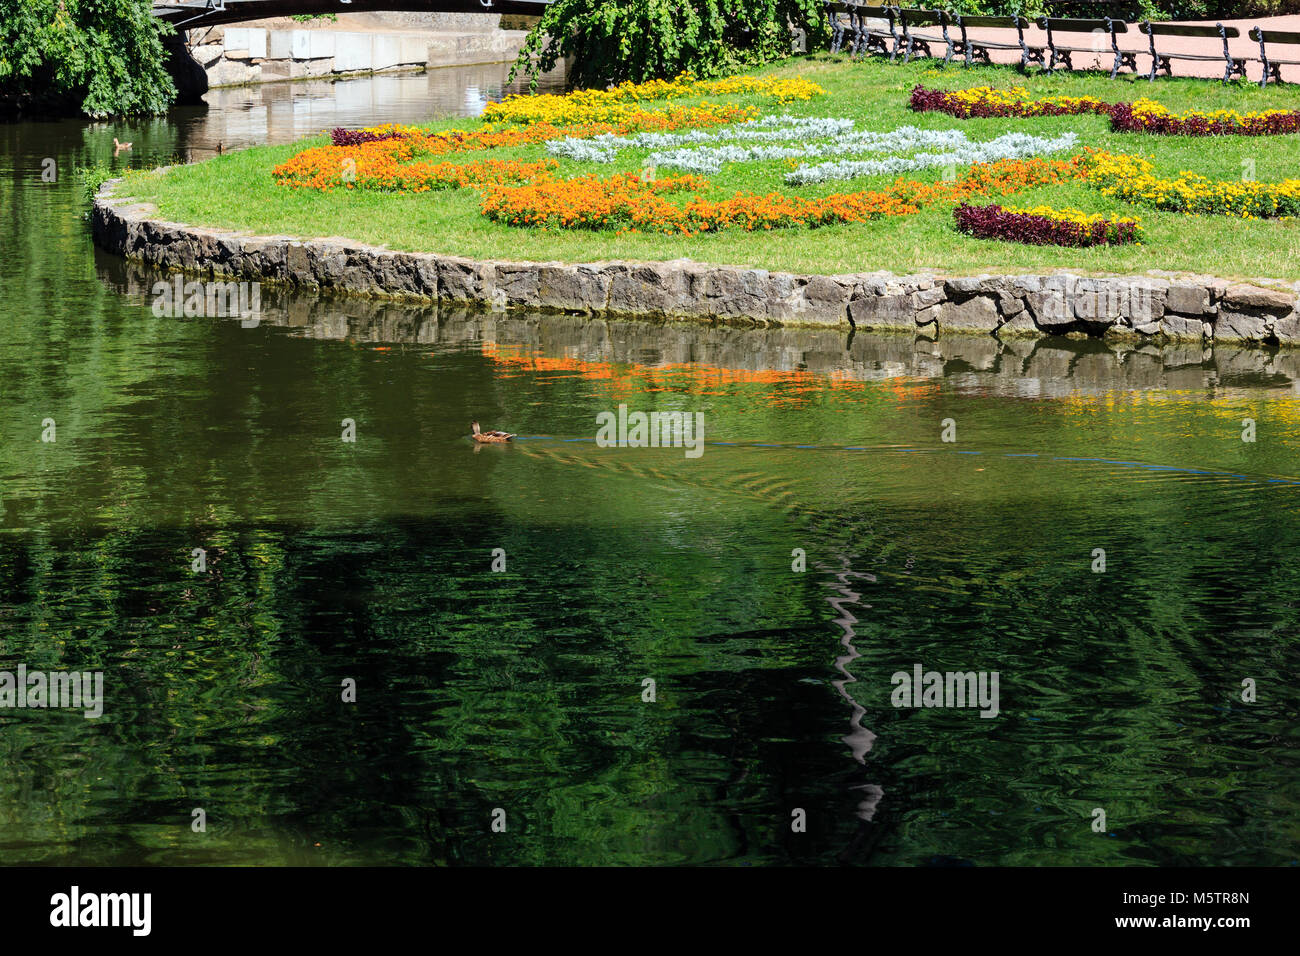 Summer National Dendrology Park of Sofiyivka. Lake and flowerbed on lawn. Uman, Ukraine. Park organized in 19th century. Stock Photo